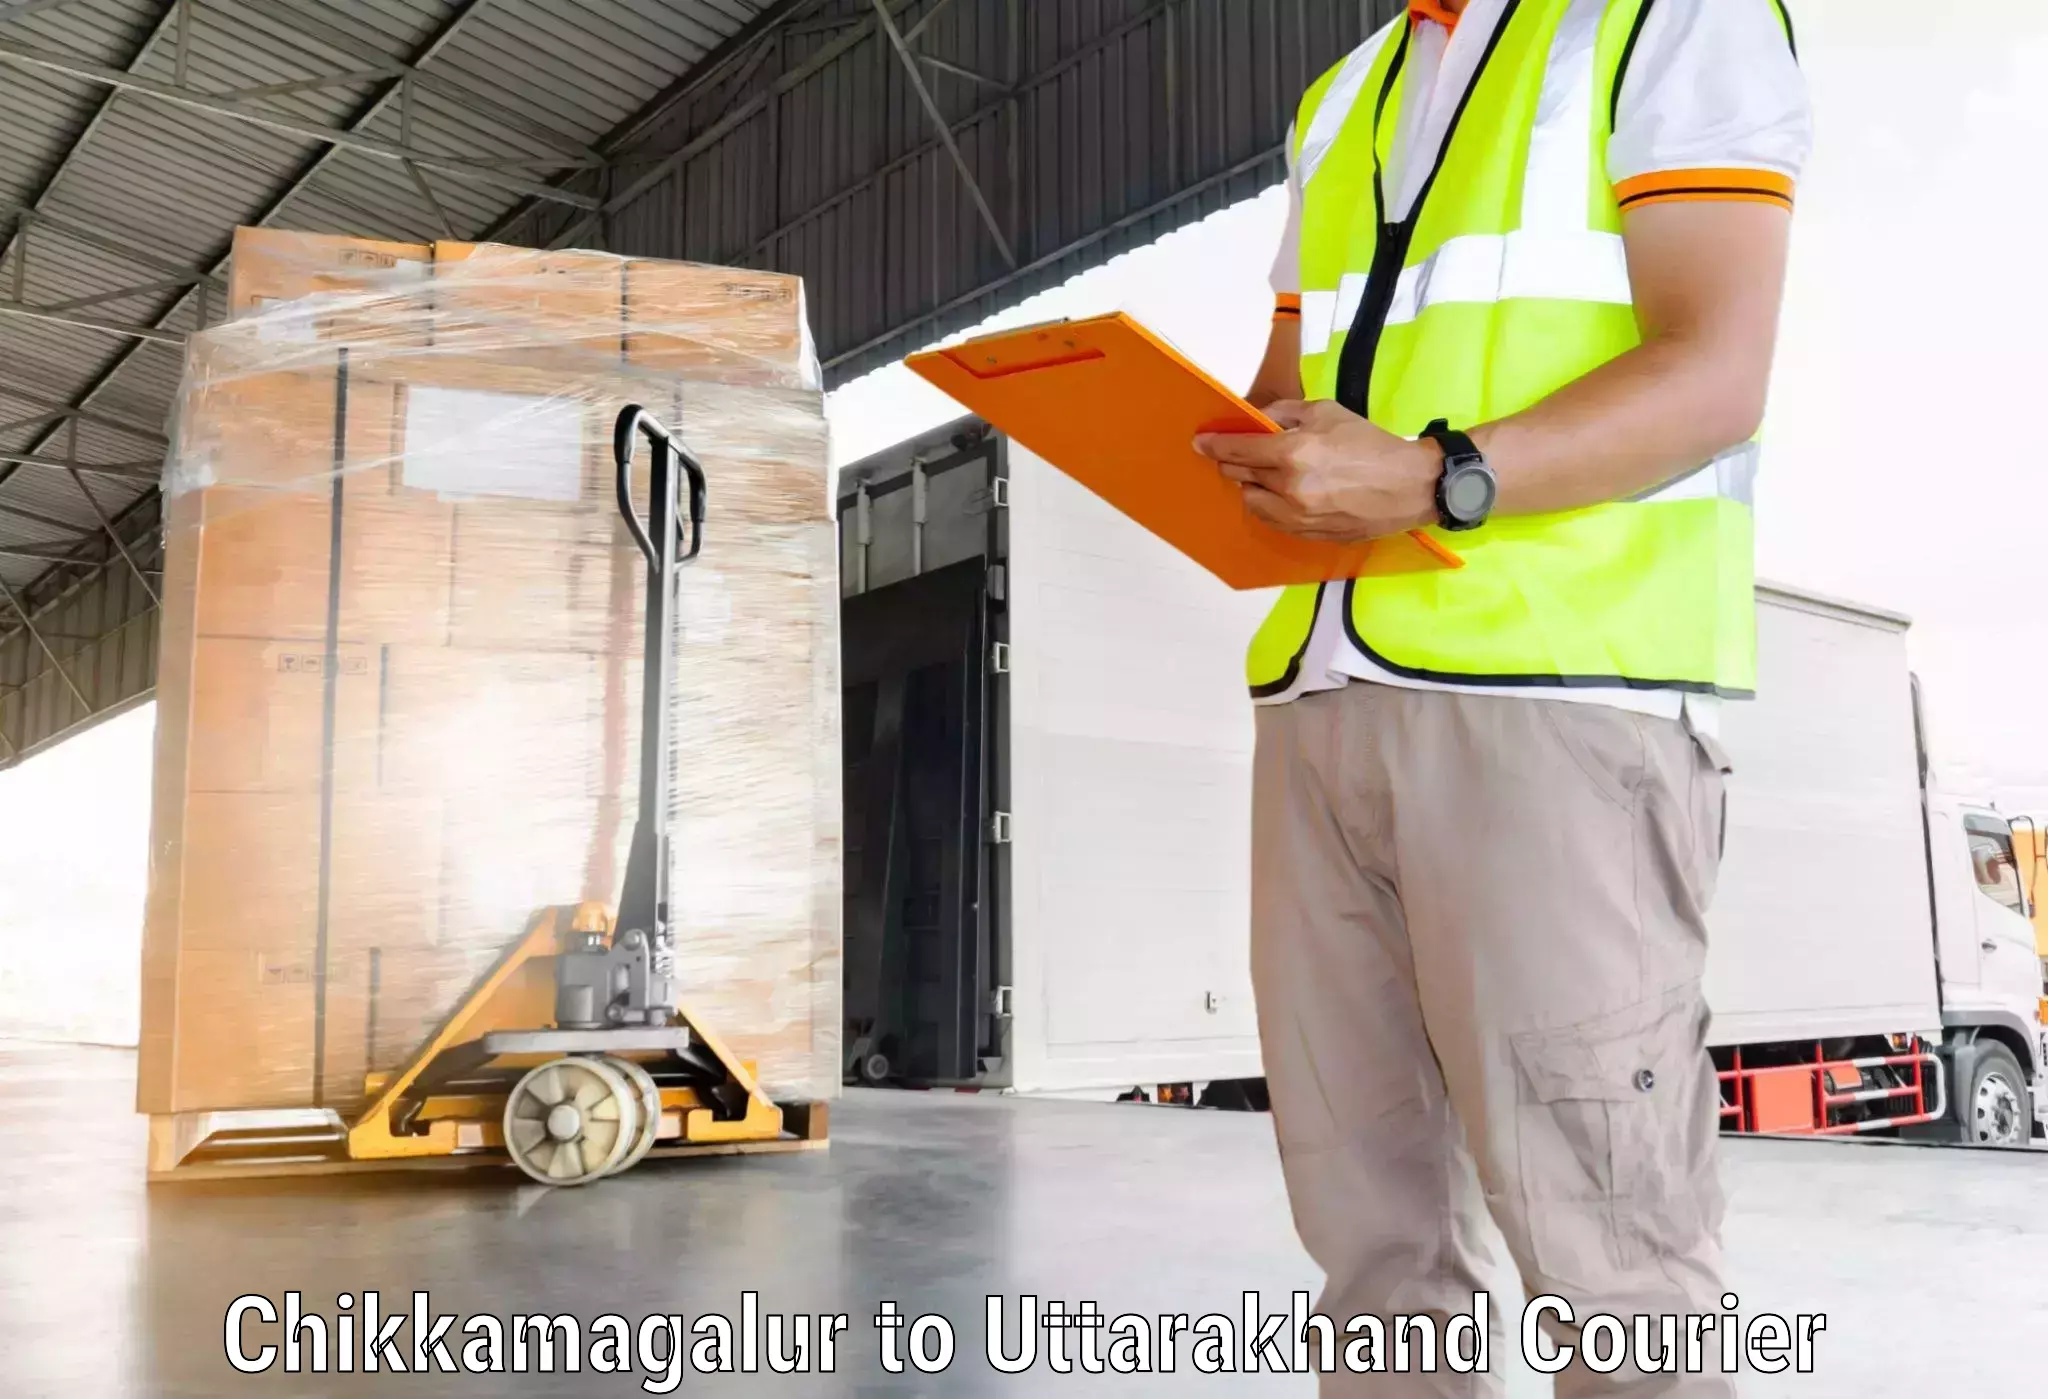 Full-service courier options Chikkamagalur to IIT Roorkee